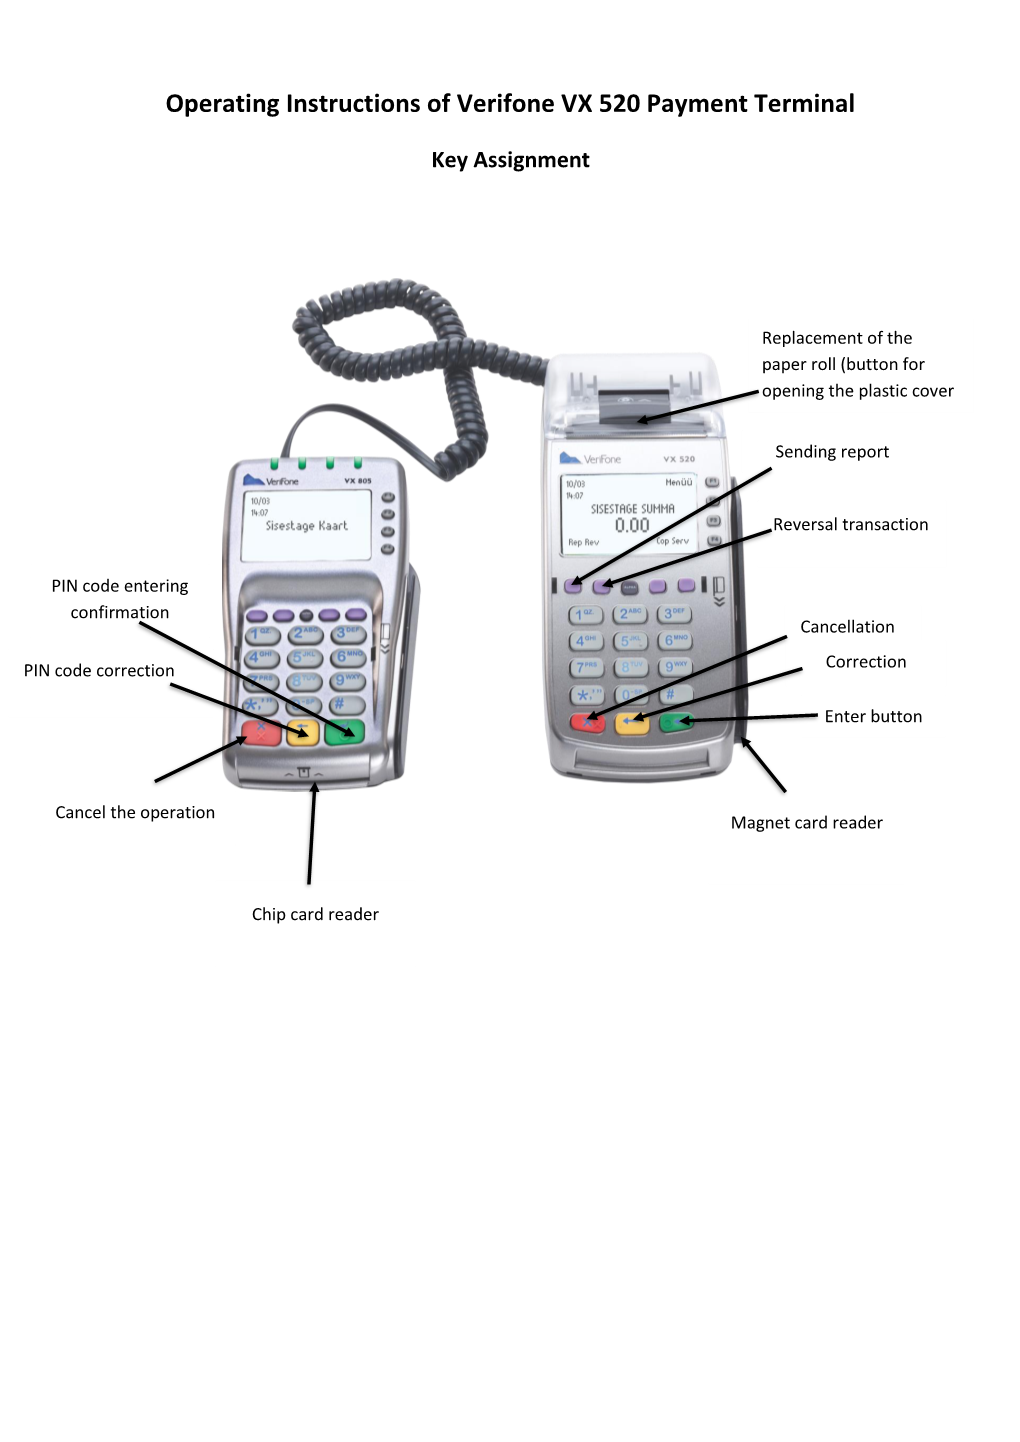 Operating Instructions of Verifone VX 520 Payment Terminal